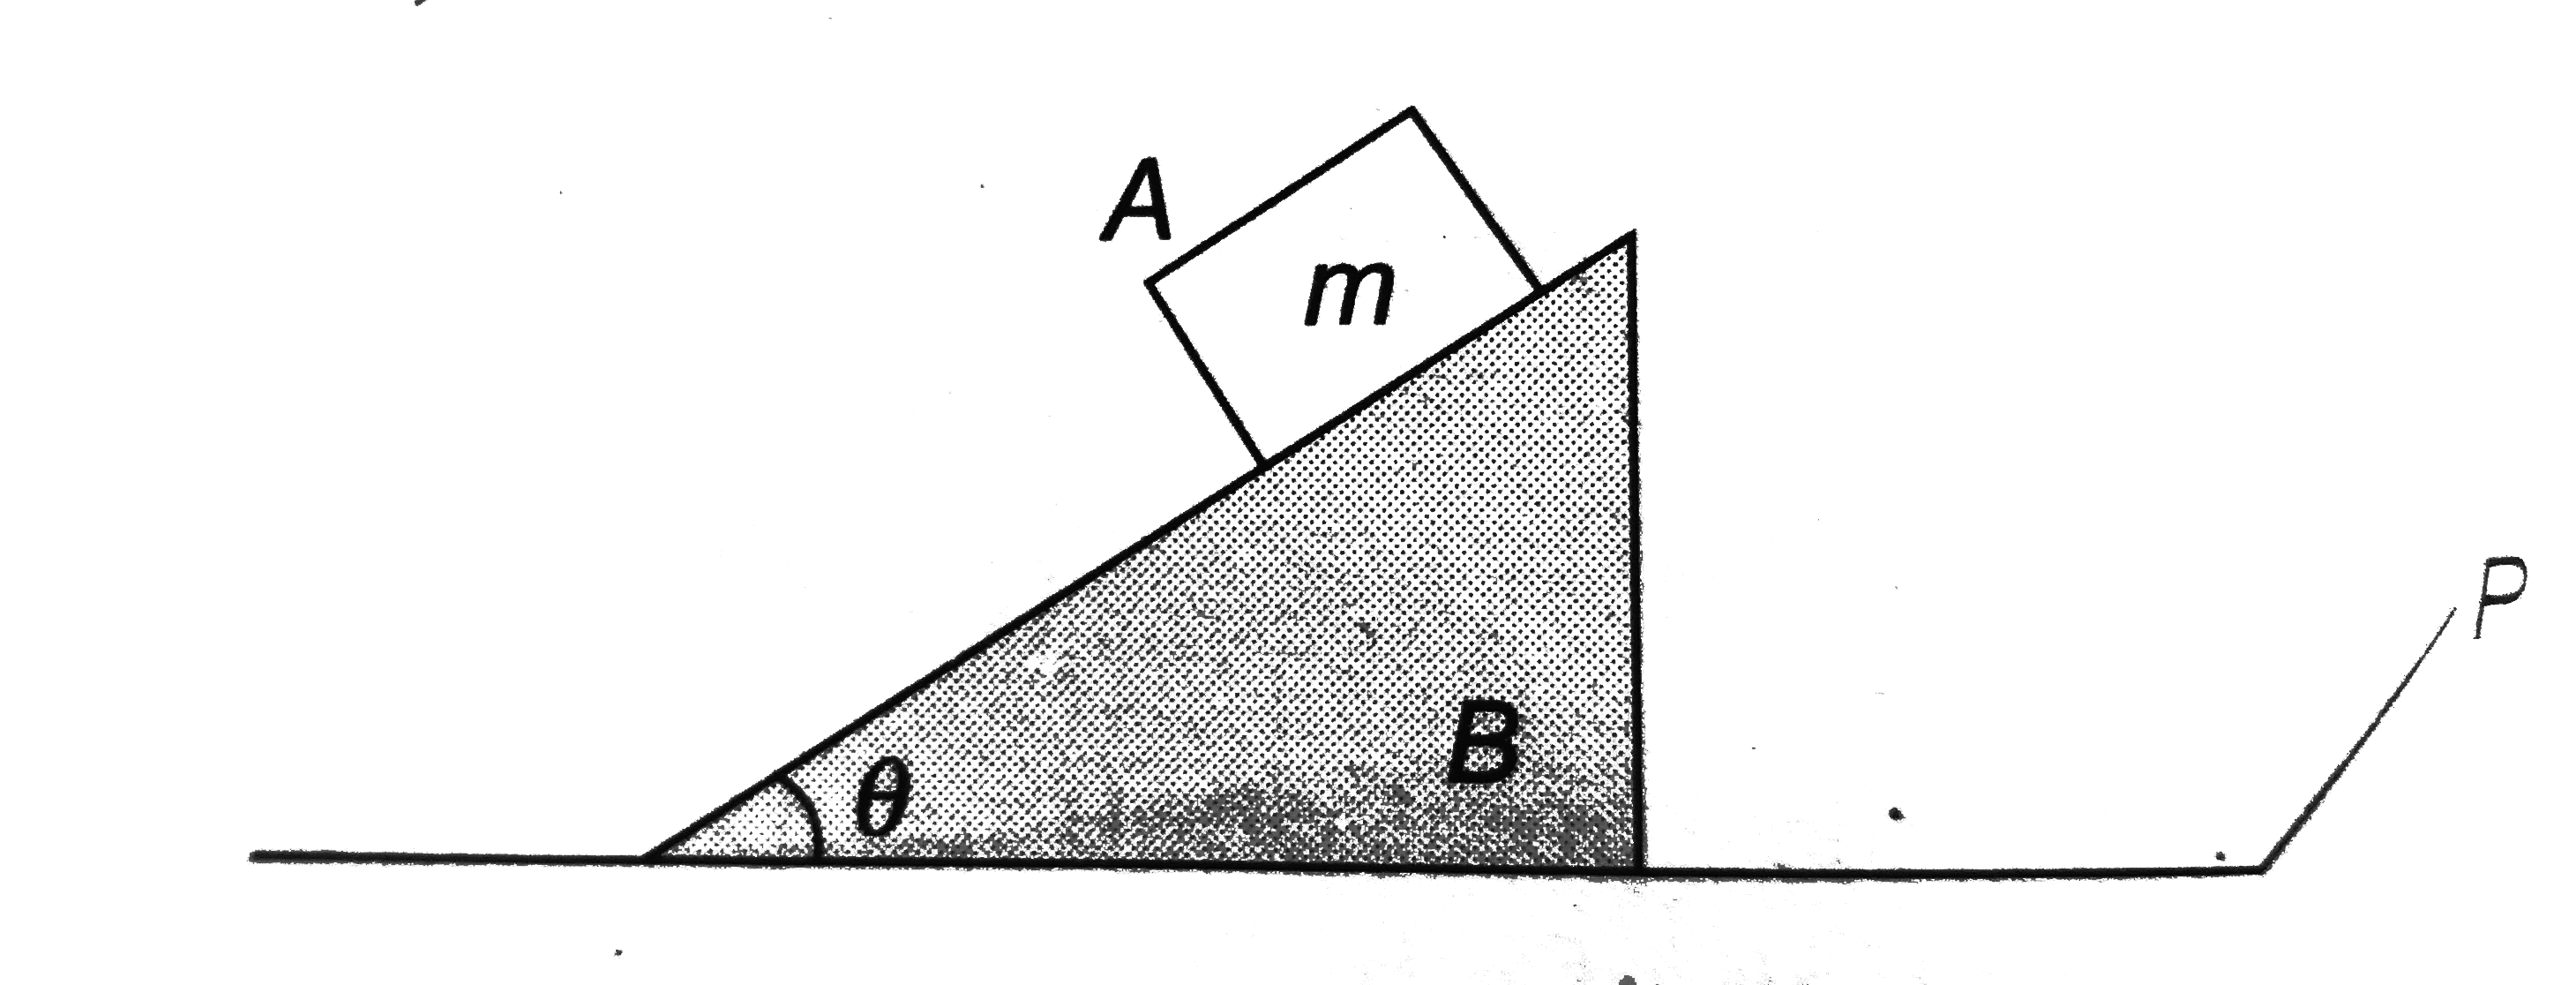 In the figure shown 'p' is a plate on which a wedge B is placed and on B a block A of mass m m is placed. The plate is suddenly removed and system of B and A is allowed to fall under gravity. Neglecting any force due to air on A and B , the normal force on A due to B is